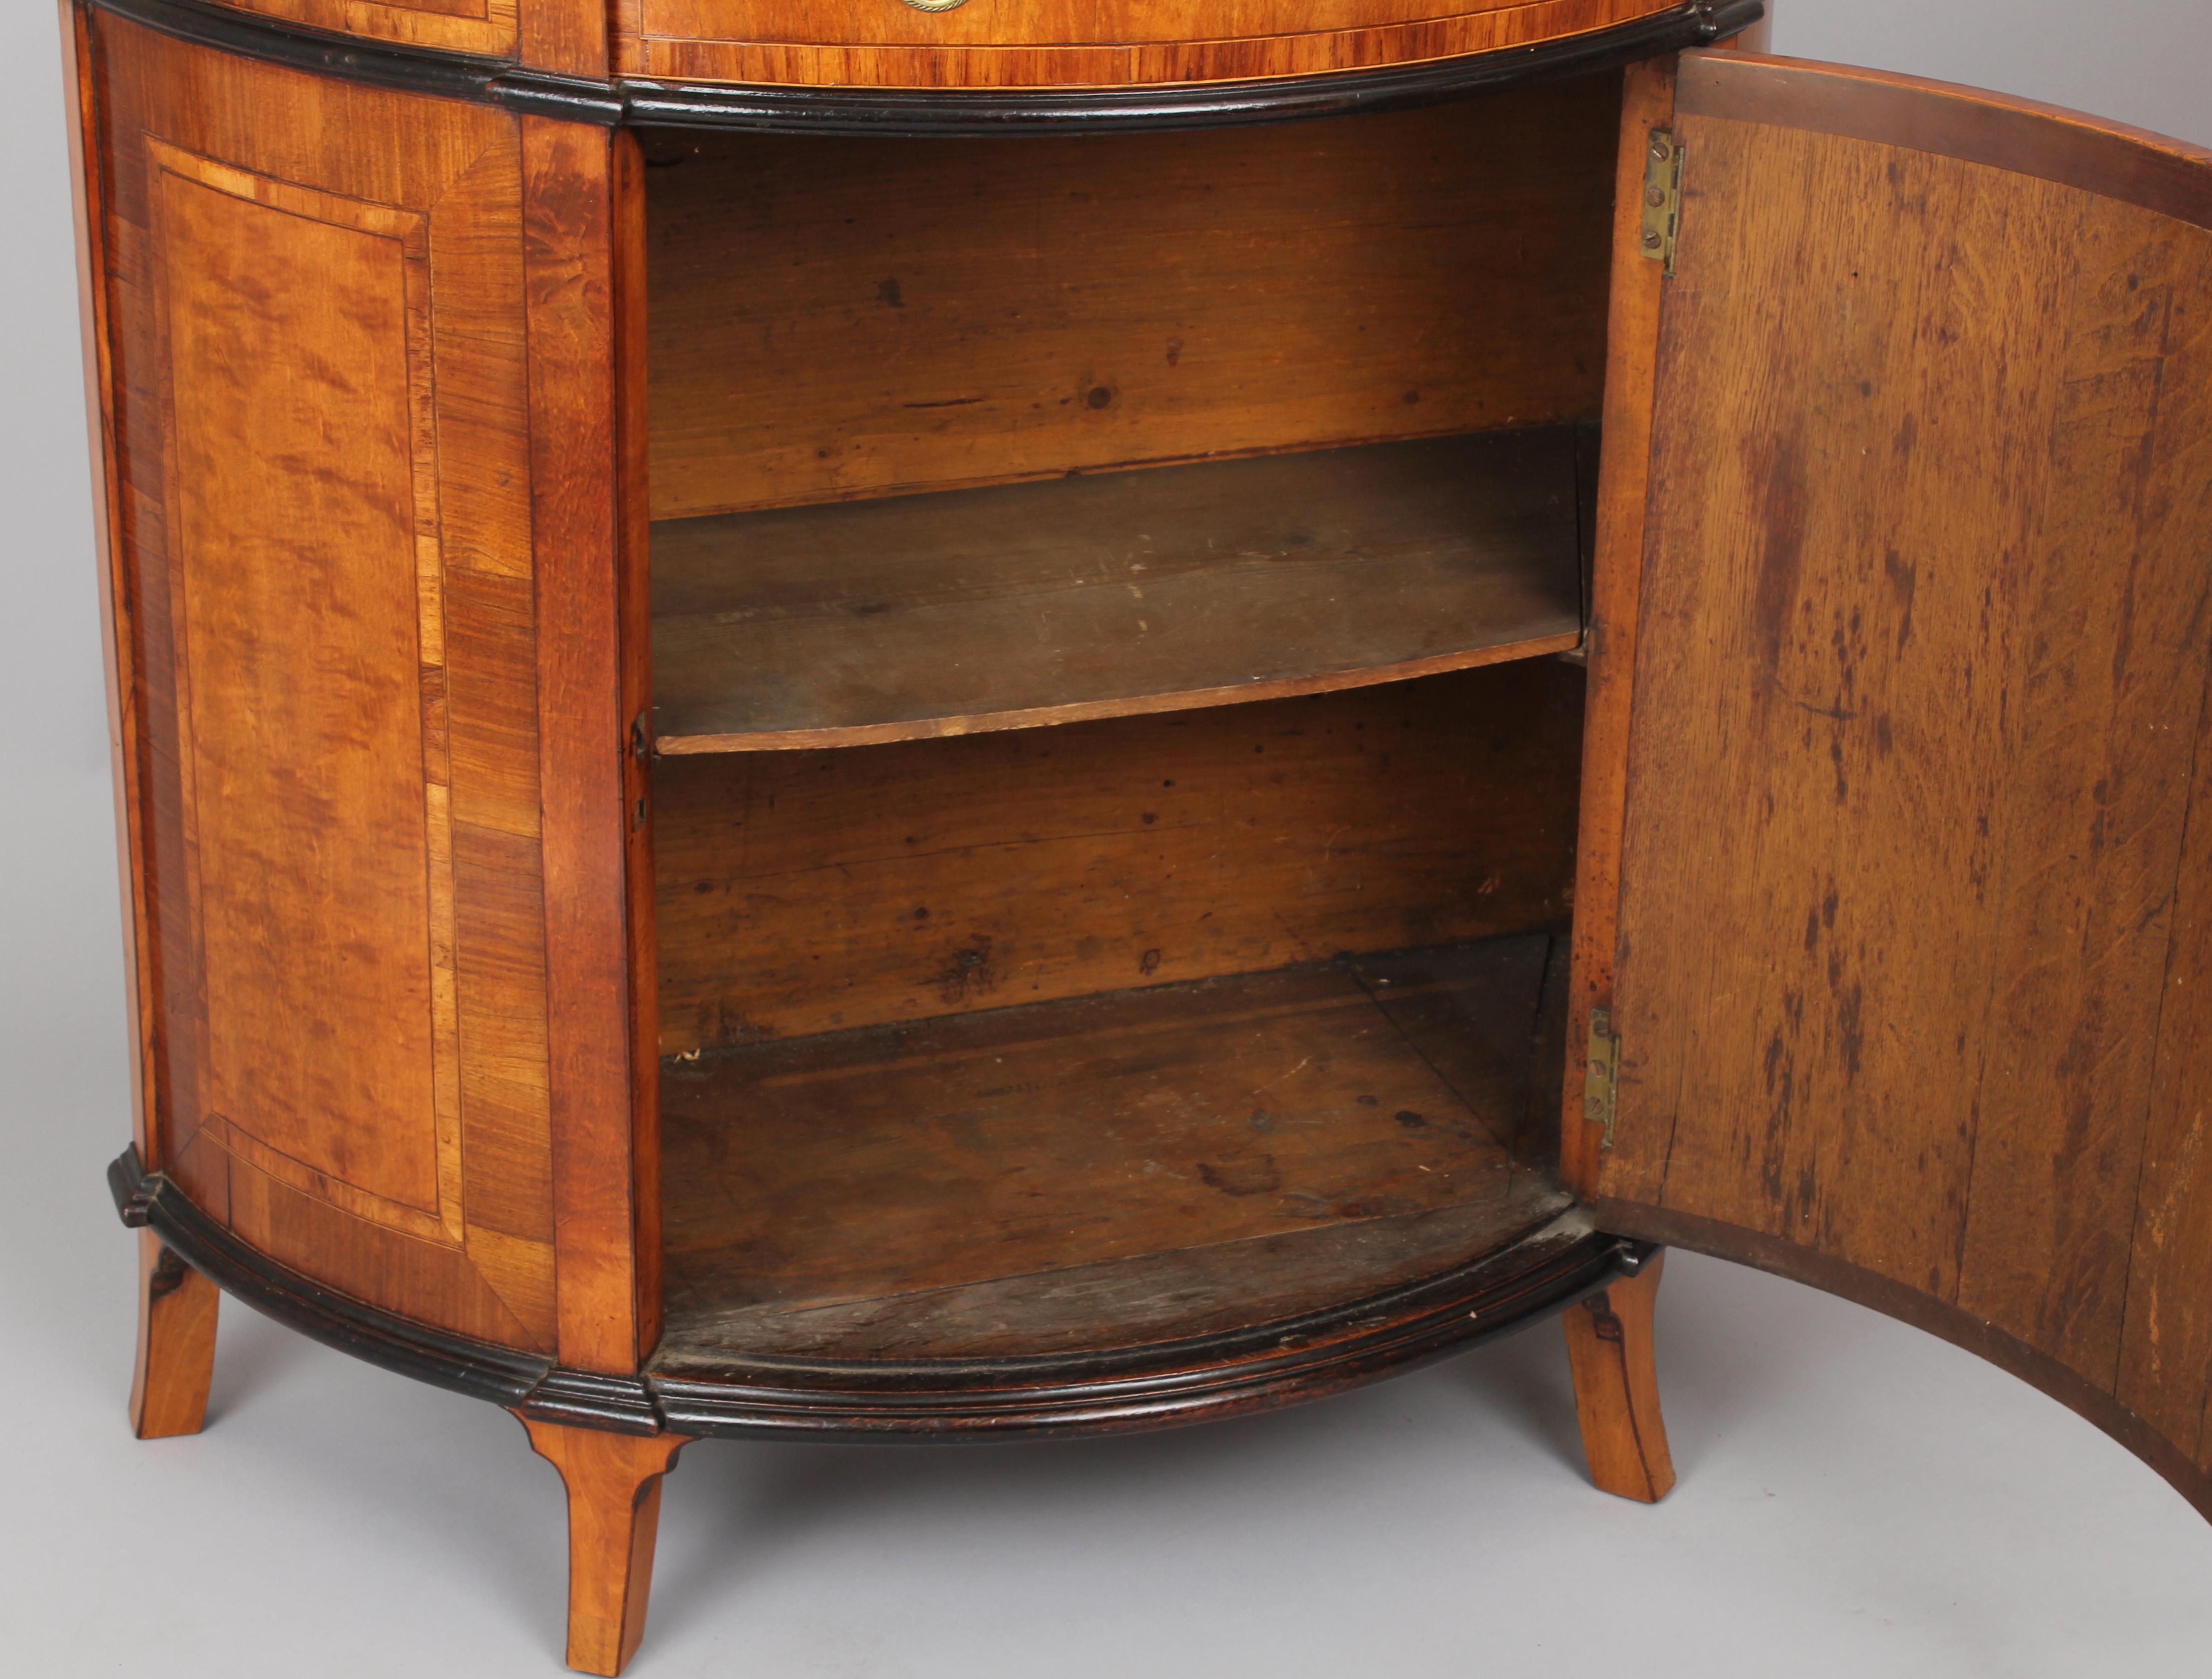 Fine George III period small semi-circular satinwood side-cabinet; the top with a rear overhand and a broad rosewood double-banded border; the shelved cupboard enclosed by a door with an inlaid oval panel, flanked by sides with rectangular panels